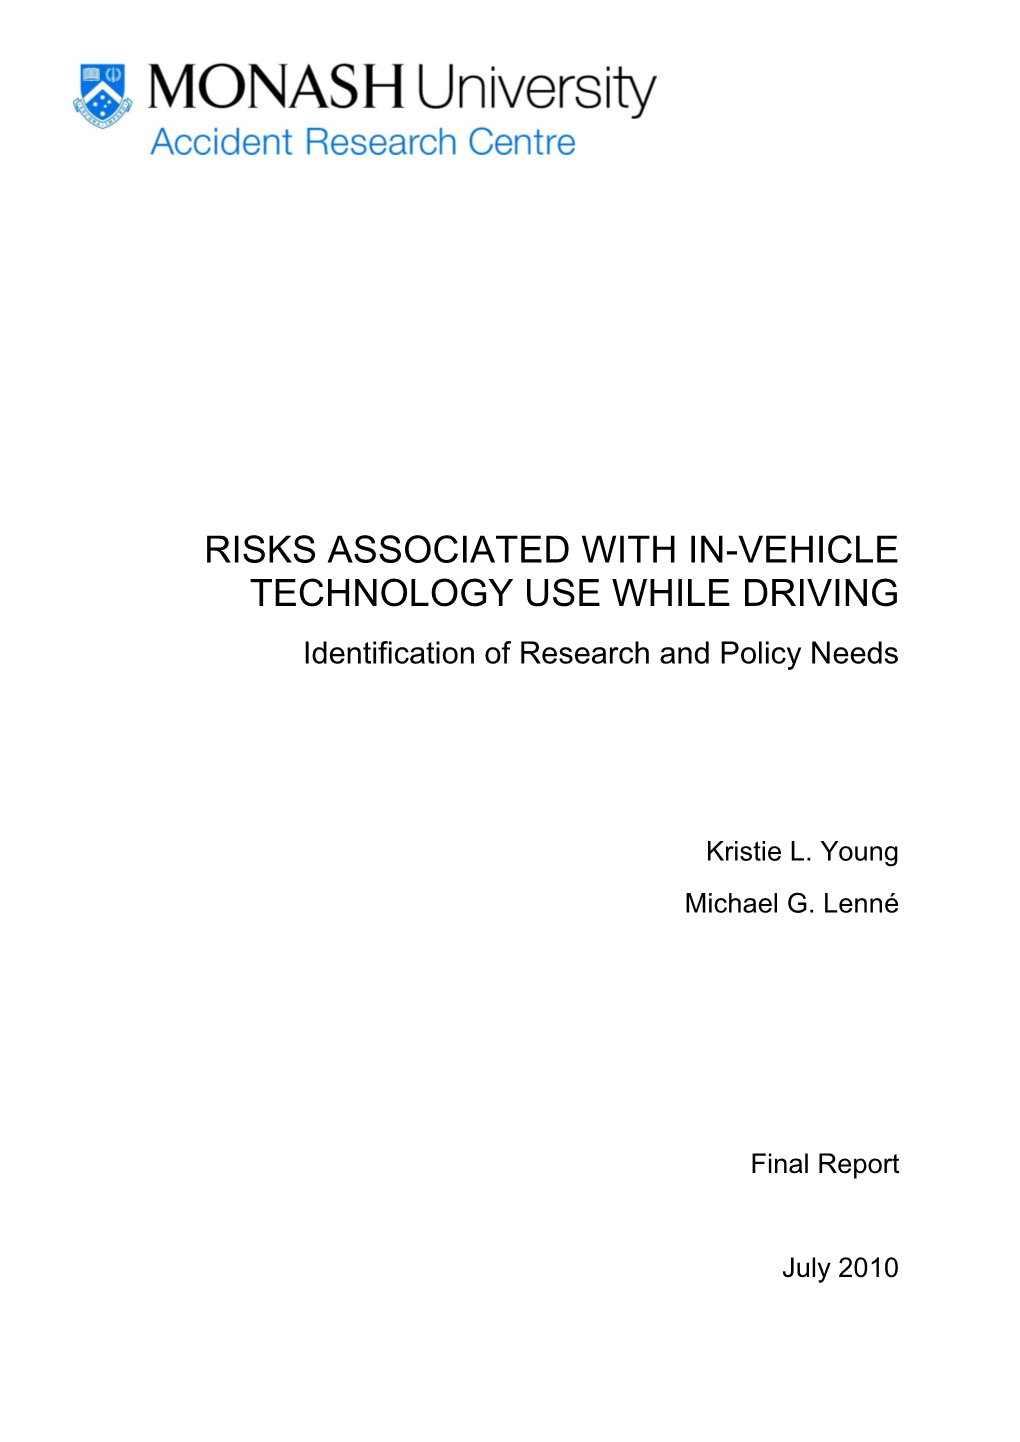 RISKS ASSOCIATED with IN-VEHICLE TECHNOLOGY USE WHILE DRIVING Identification of Research and Policy Needs